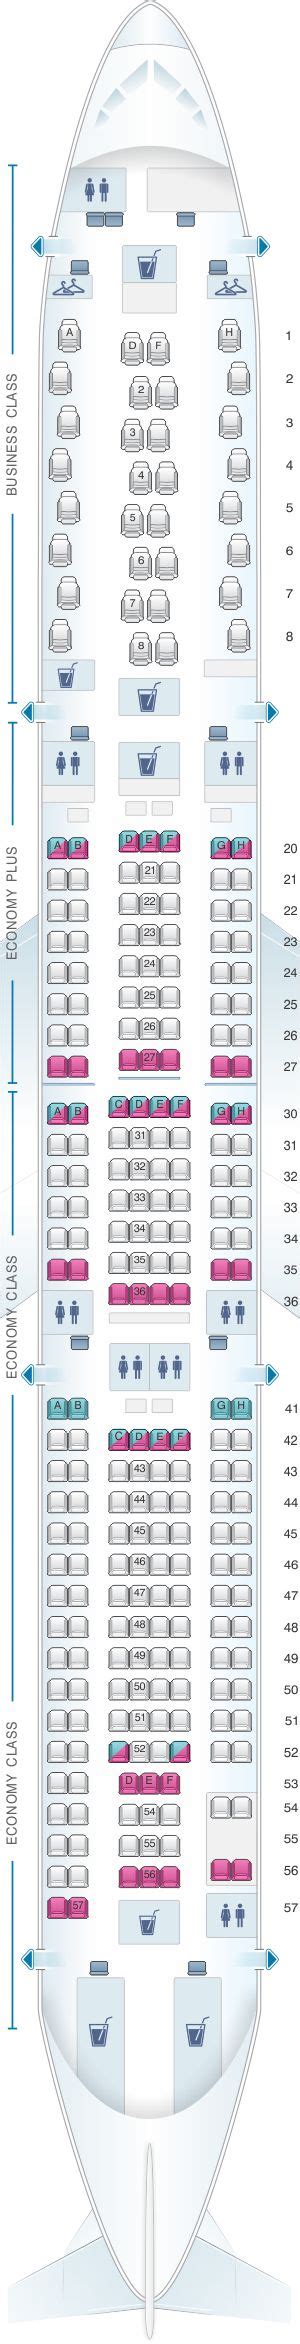 Seat Map Scandinavian Airlines Sas Airbus A330 300 Asiana Airlines